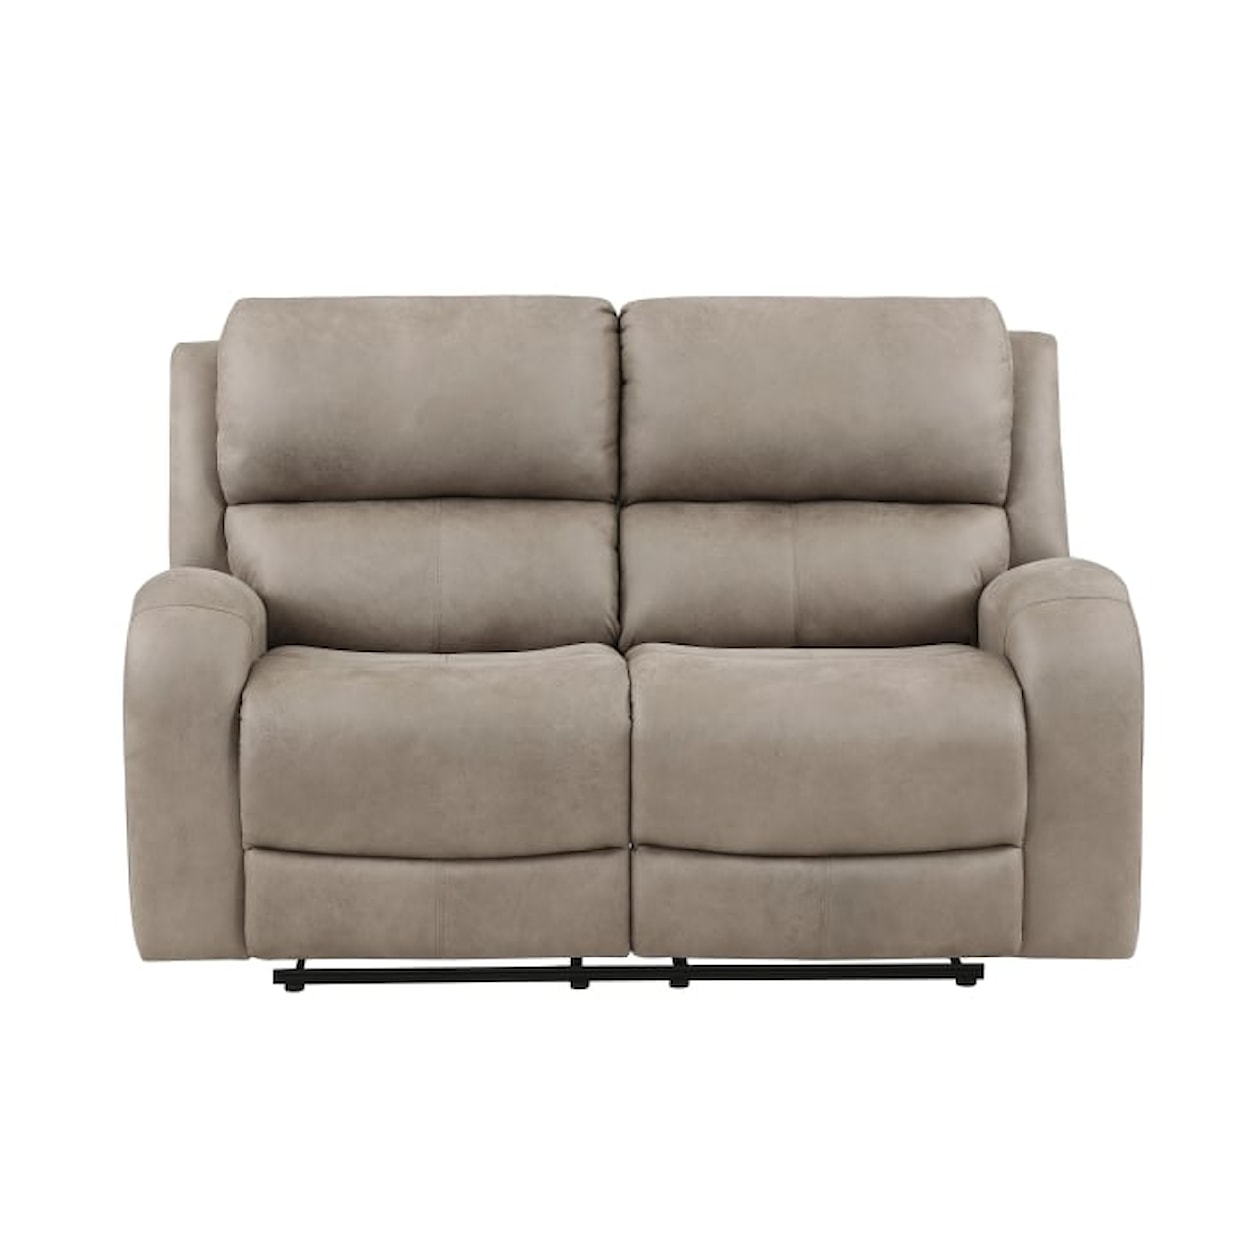 Homelegance Furniture Pagosa Double Reclining Love Seat